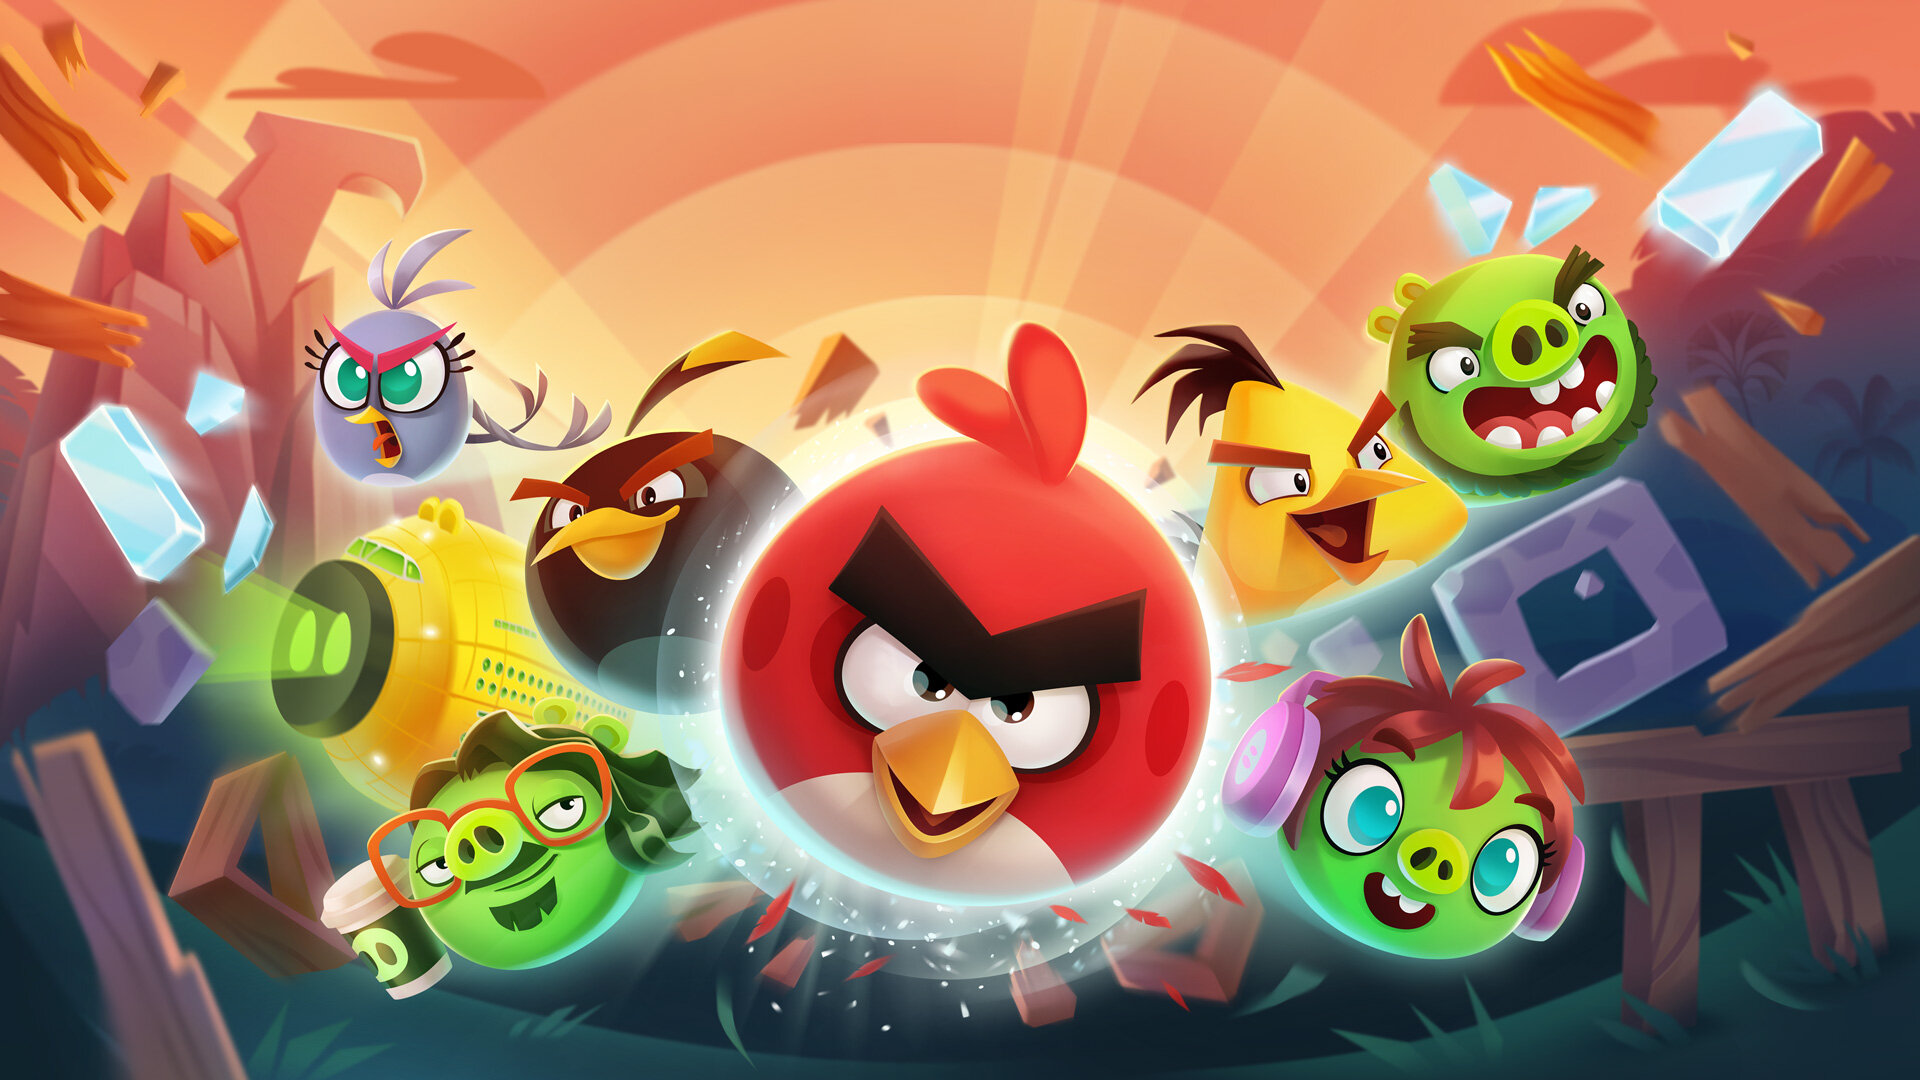 Keyart painting for Angry Birds Reloaded, Rovio Entertainment